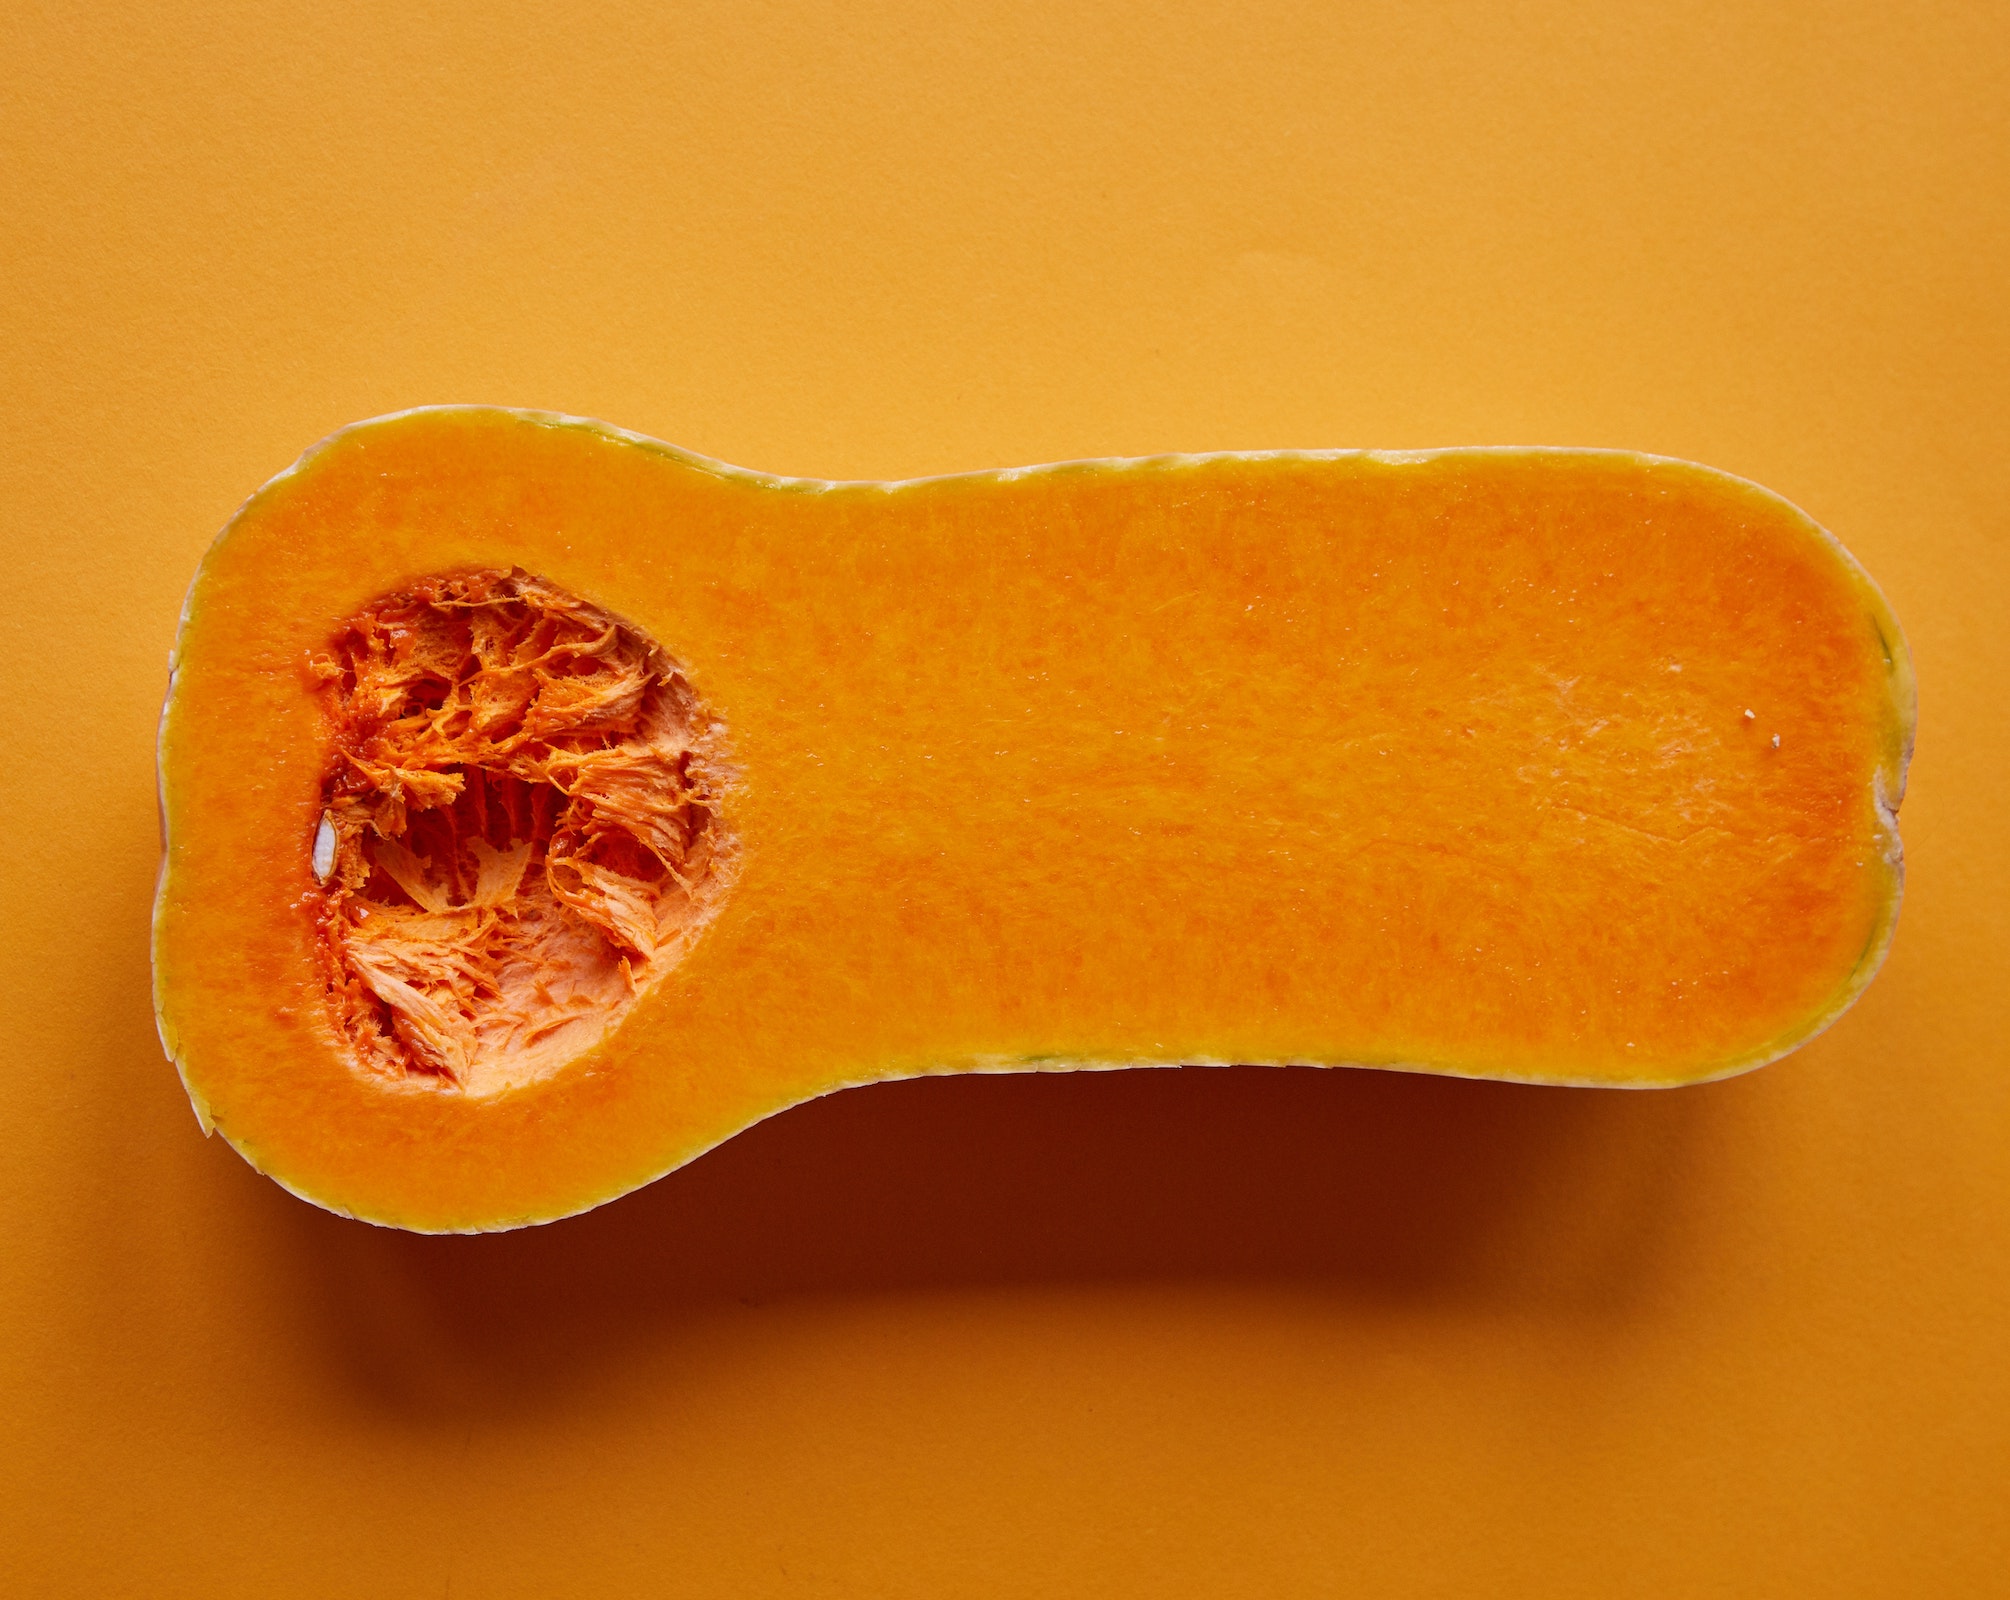 Tips to Use Winter Squash and Prevent Food Waste